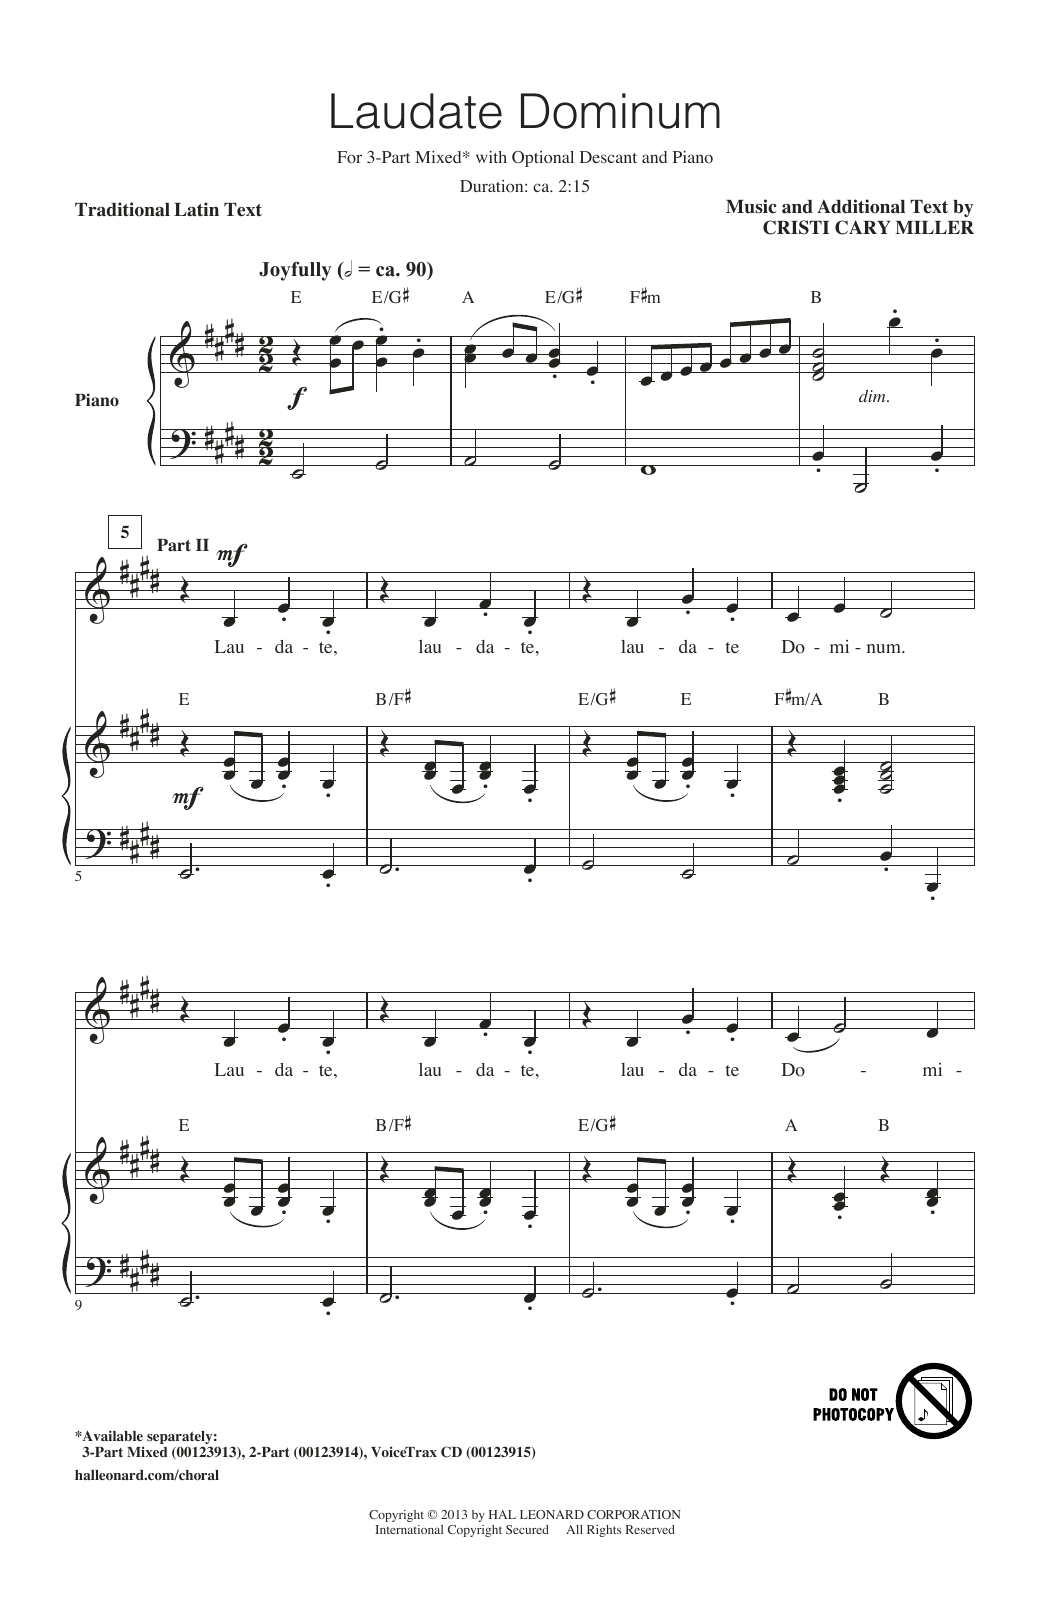 Cristi Cary Miller Laudate Dominum sheet music notes and chords. Download Printable PDF.